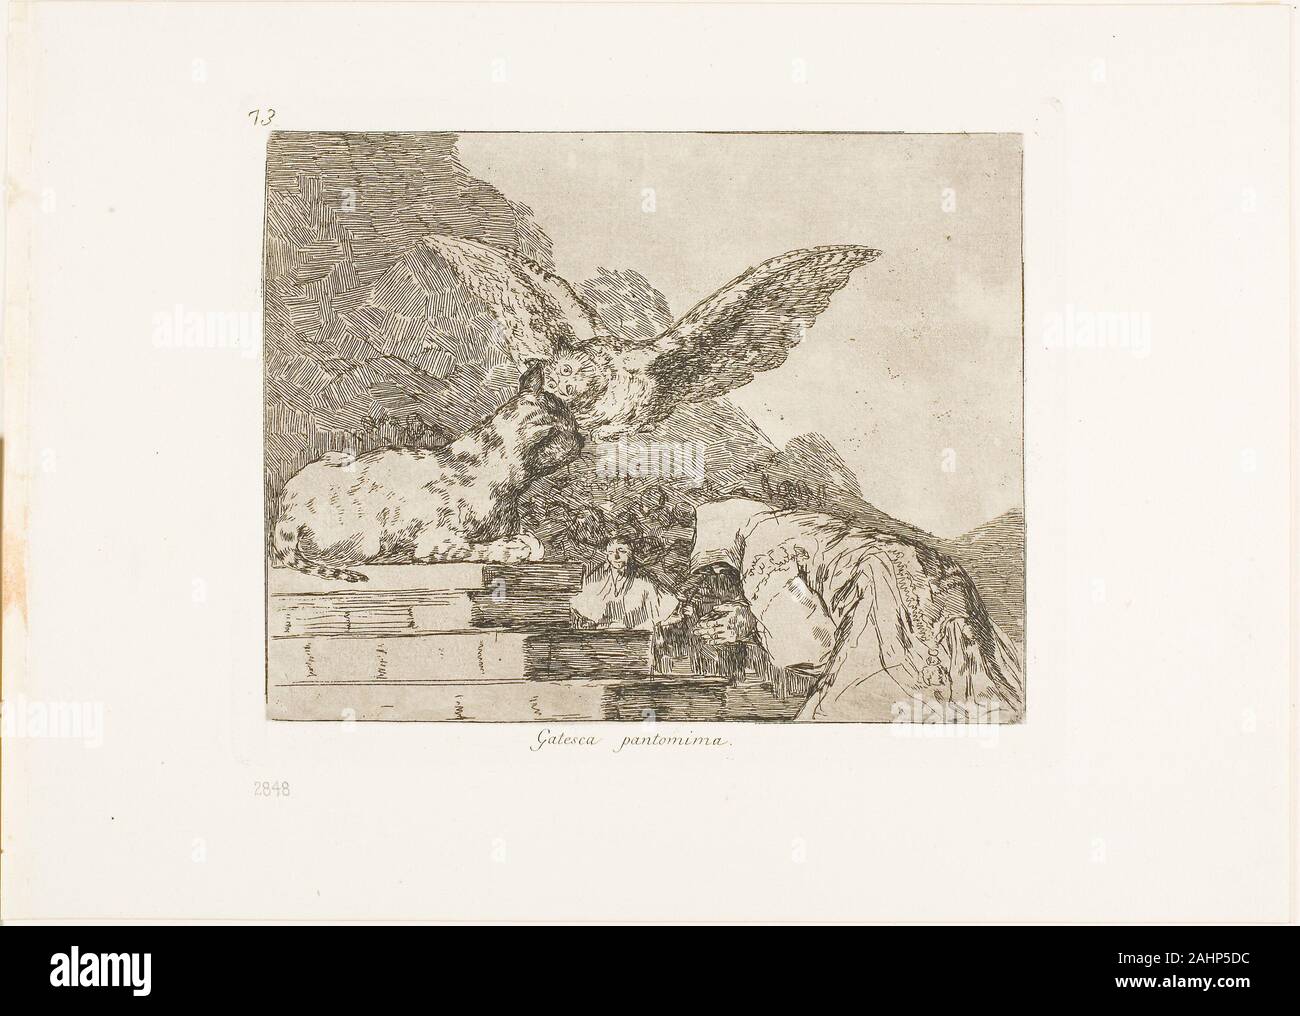 Francisco José de Goya y Lucientes. Feline pantomime, plate 73 from The Disasters of War. 1815–1820. Spain. Etching, burin, and burnishing on ivory wove paper with gilt edges Stock Photo